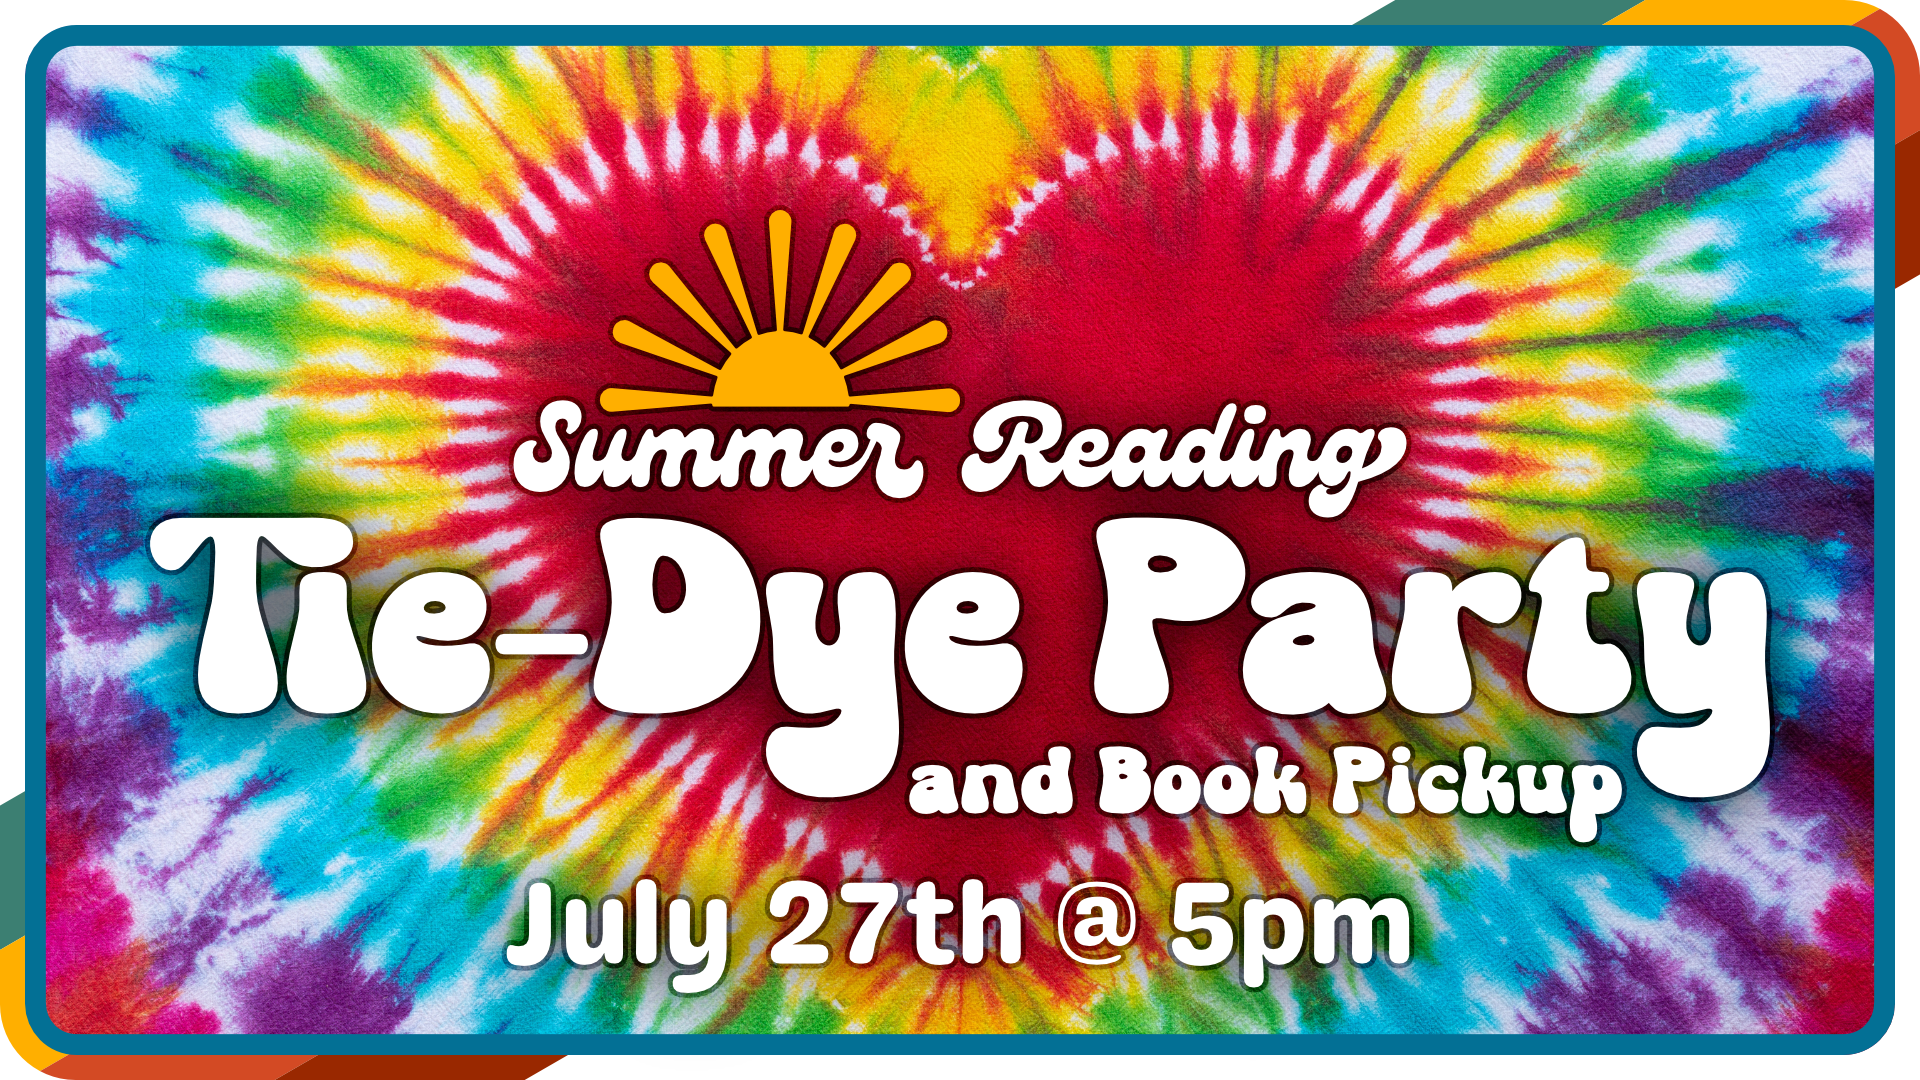 Summer Reading Tie-Dye Party, July 27th at 5pm